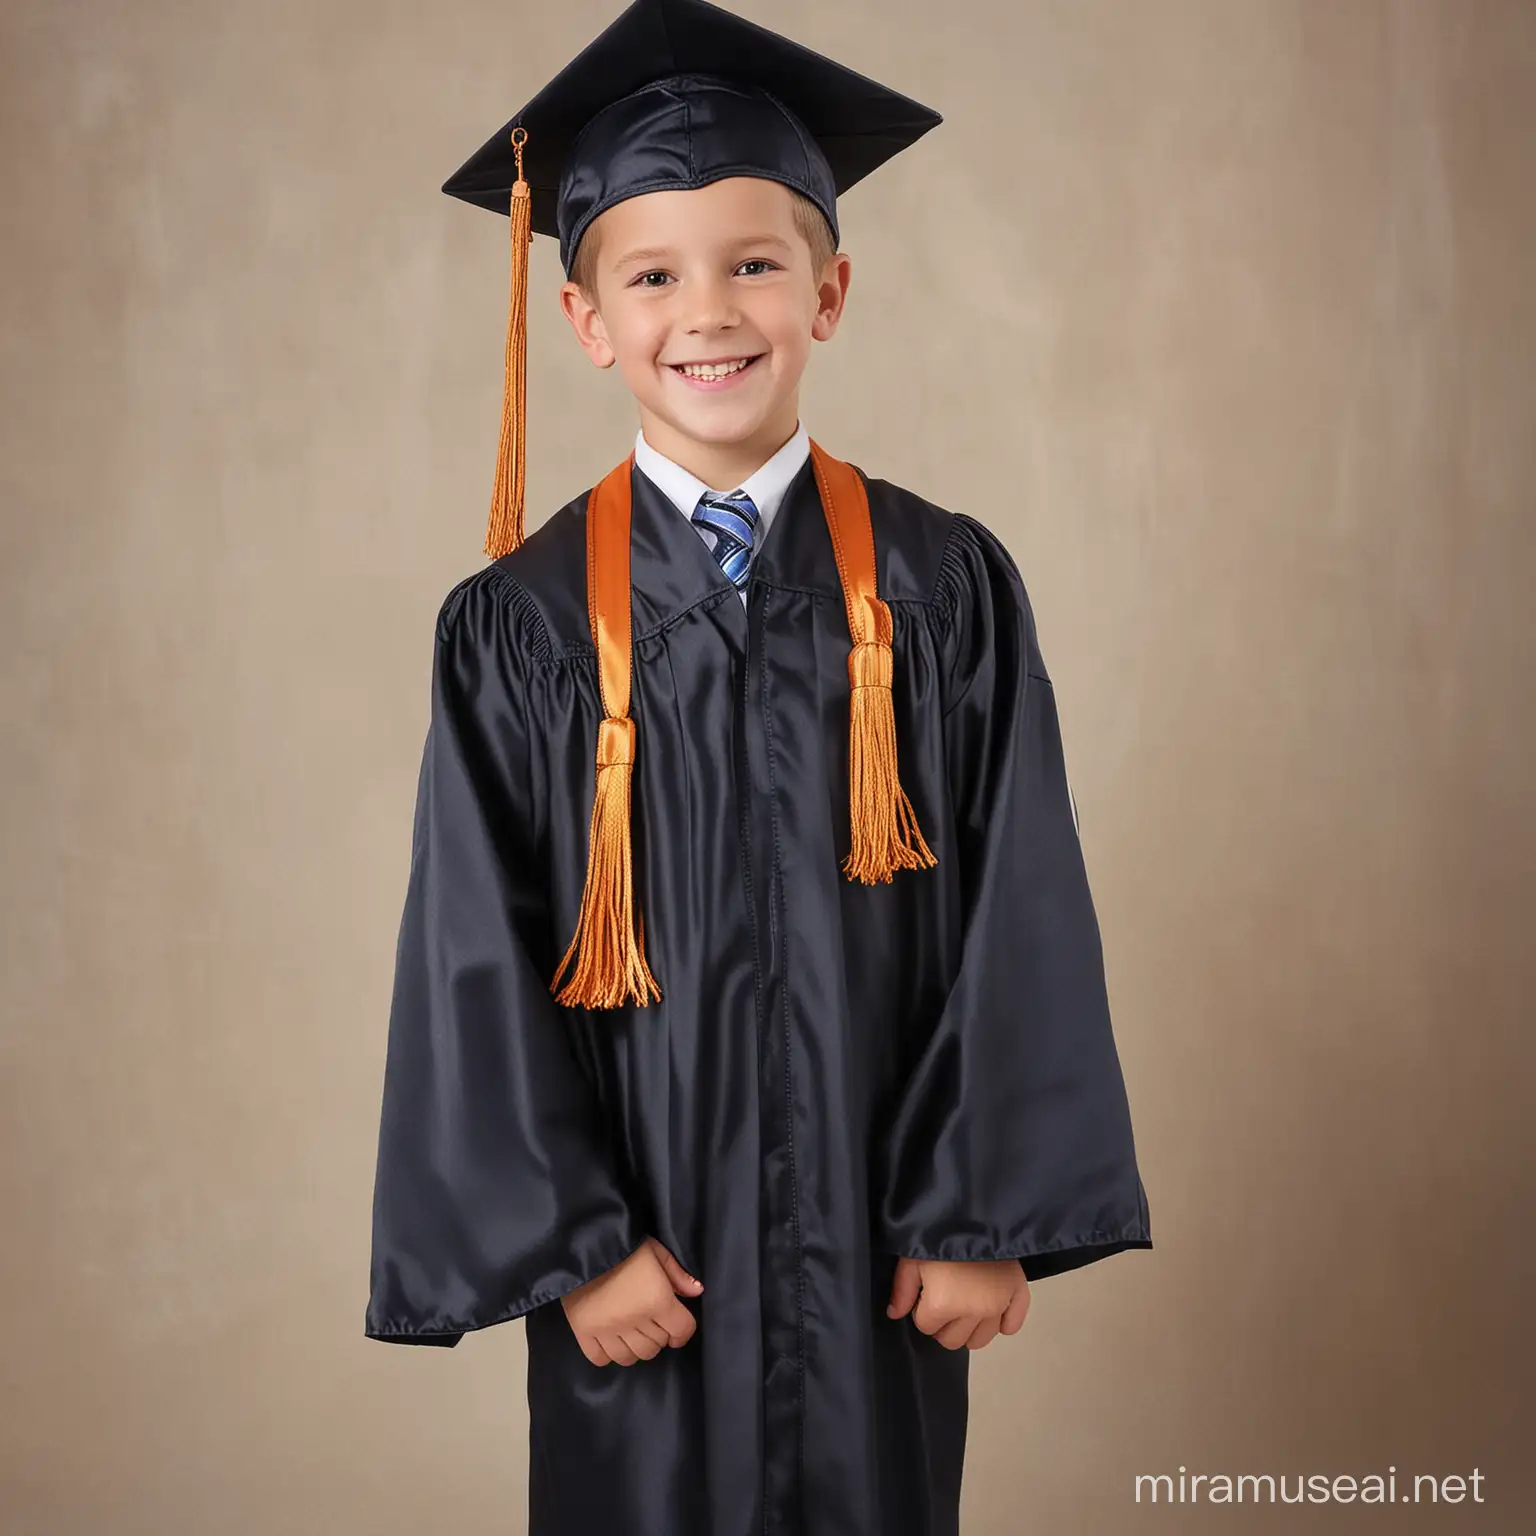 create an kindergartener graduate with cap and gown and smile. 